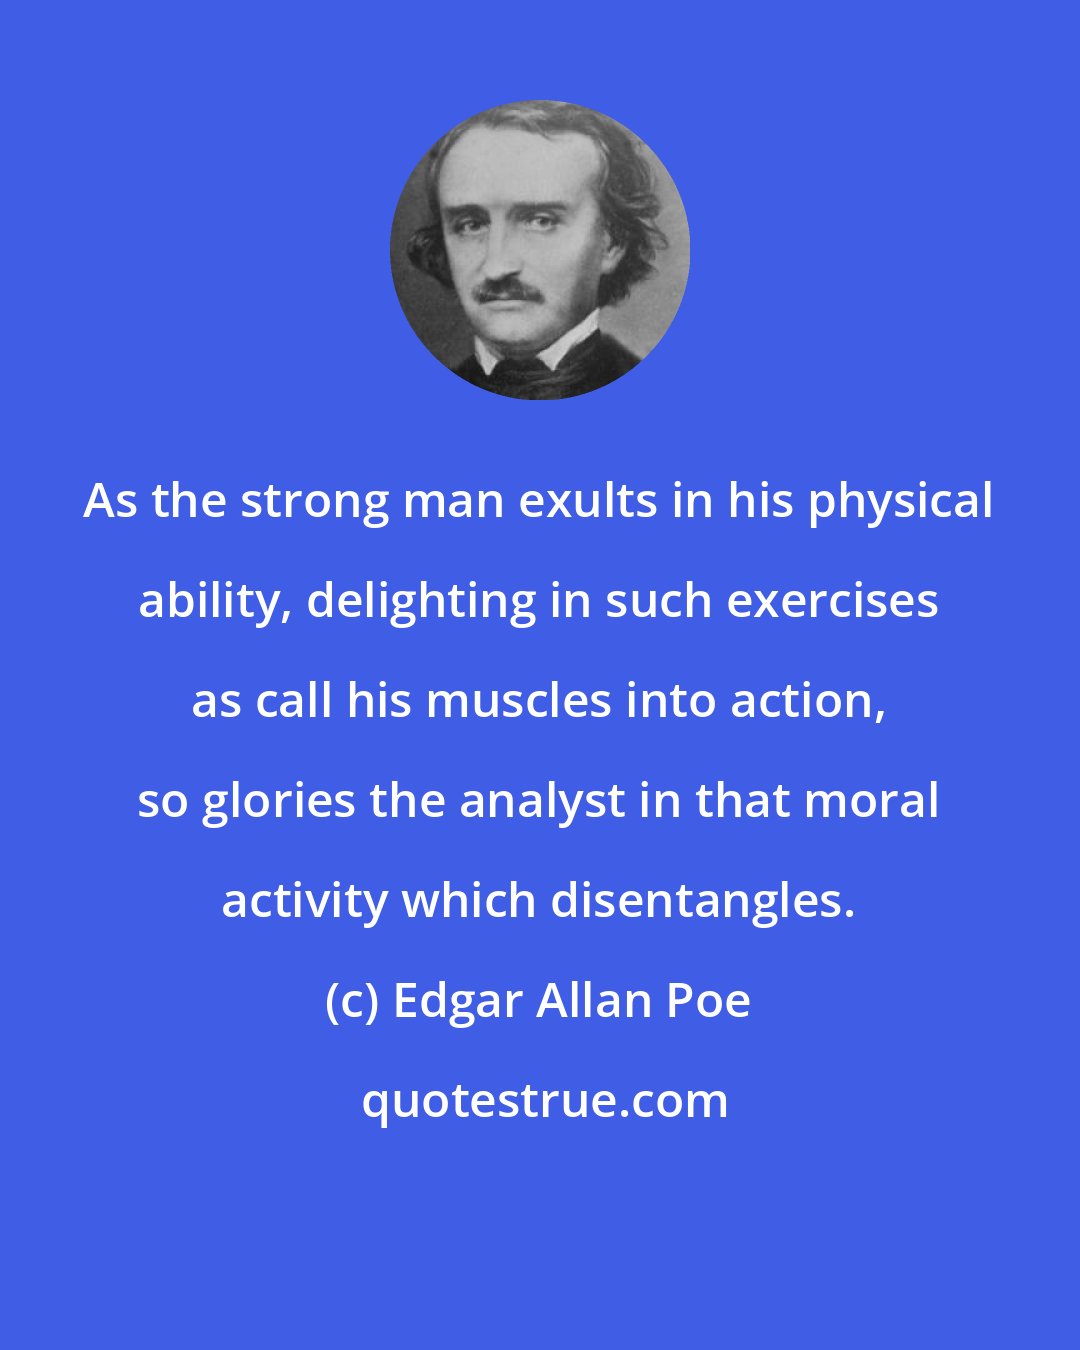 Edgar Allan Poe: As the strong man exults in his physical ability, delighting in such exercises as call his muscles into action, so glories the analyst in that moral activity which disentangles.